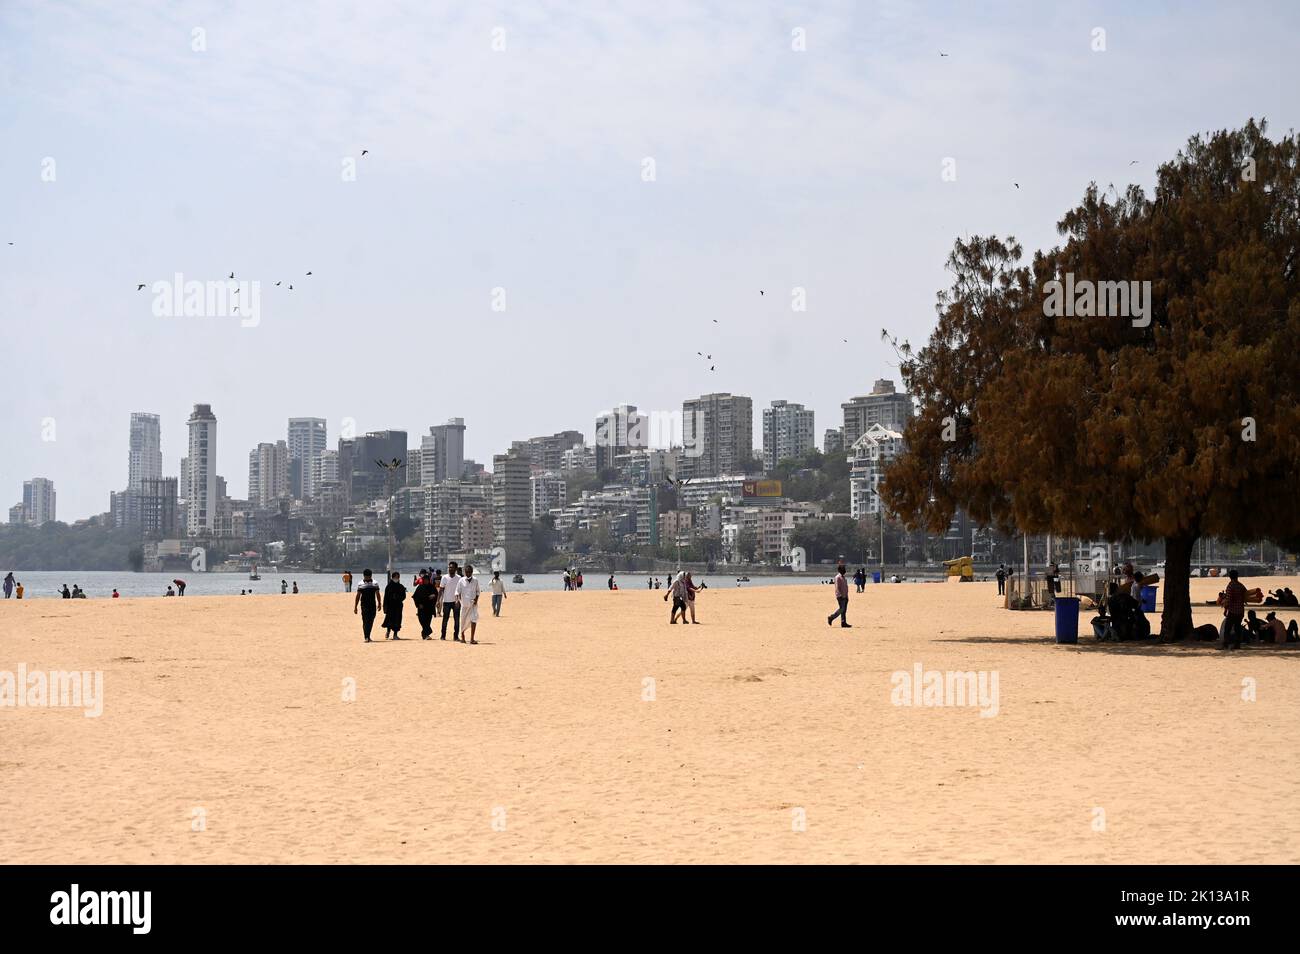 People strolling on Juhu beach, high rise city buildings in the background, Mumbai, India, Asia Stock Photo